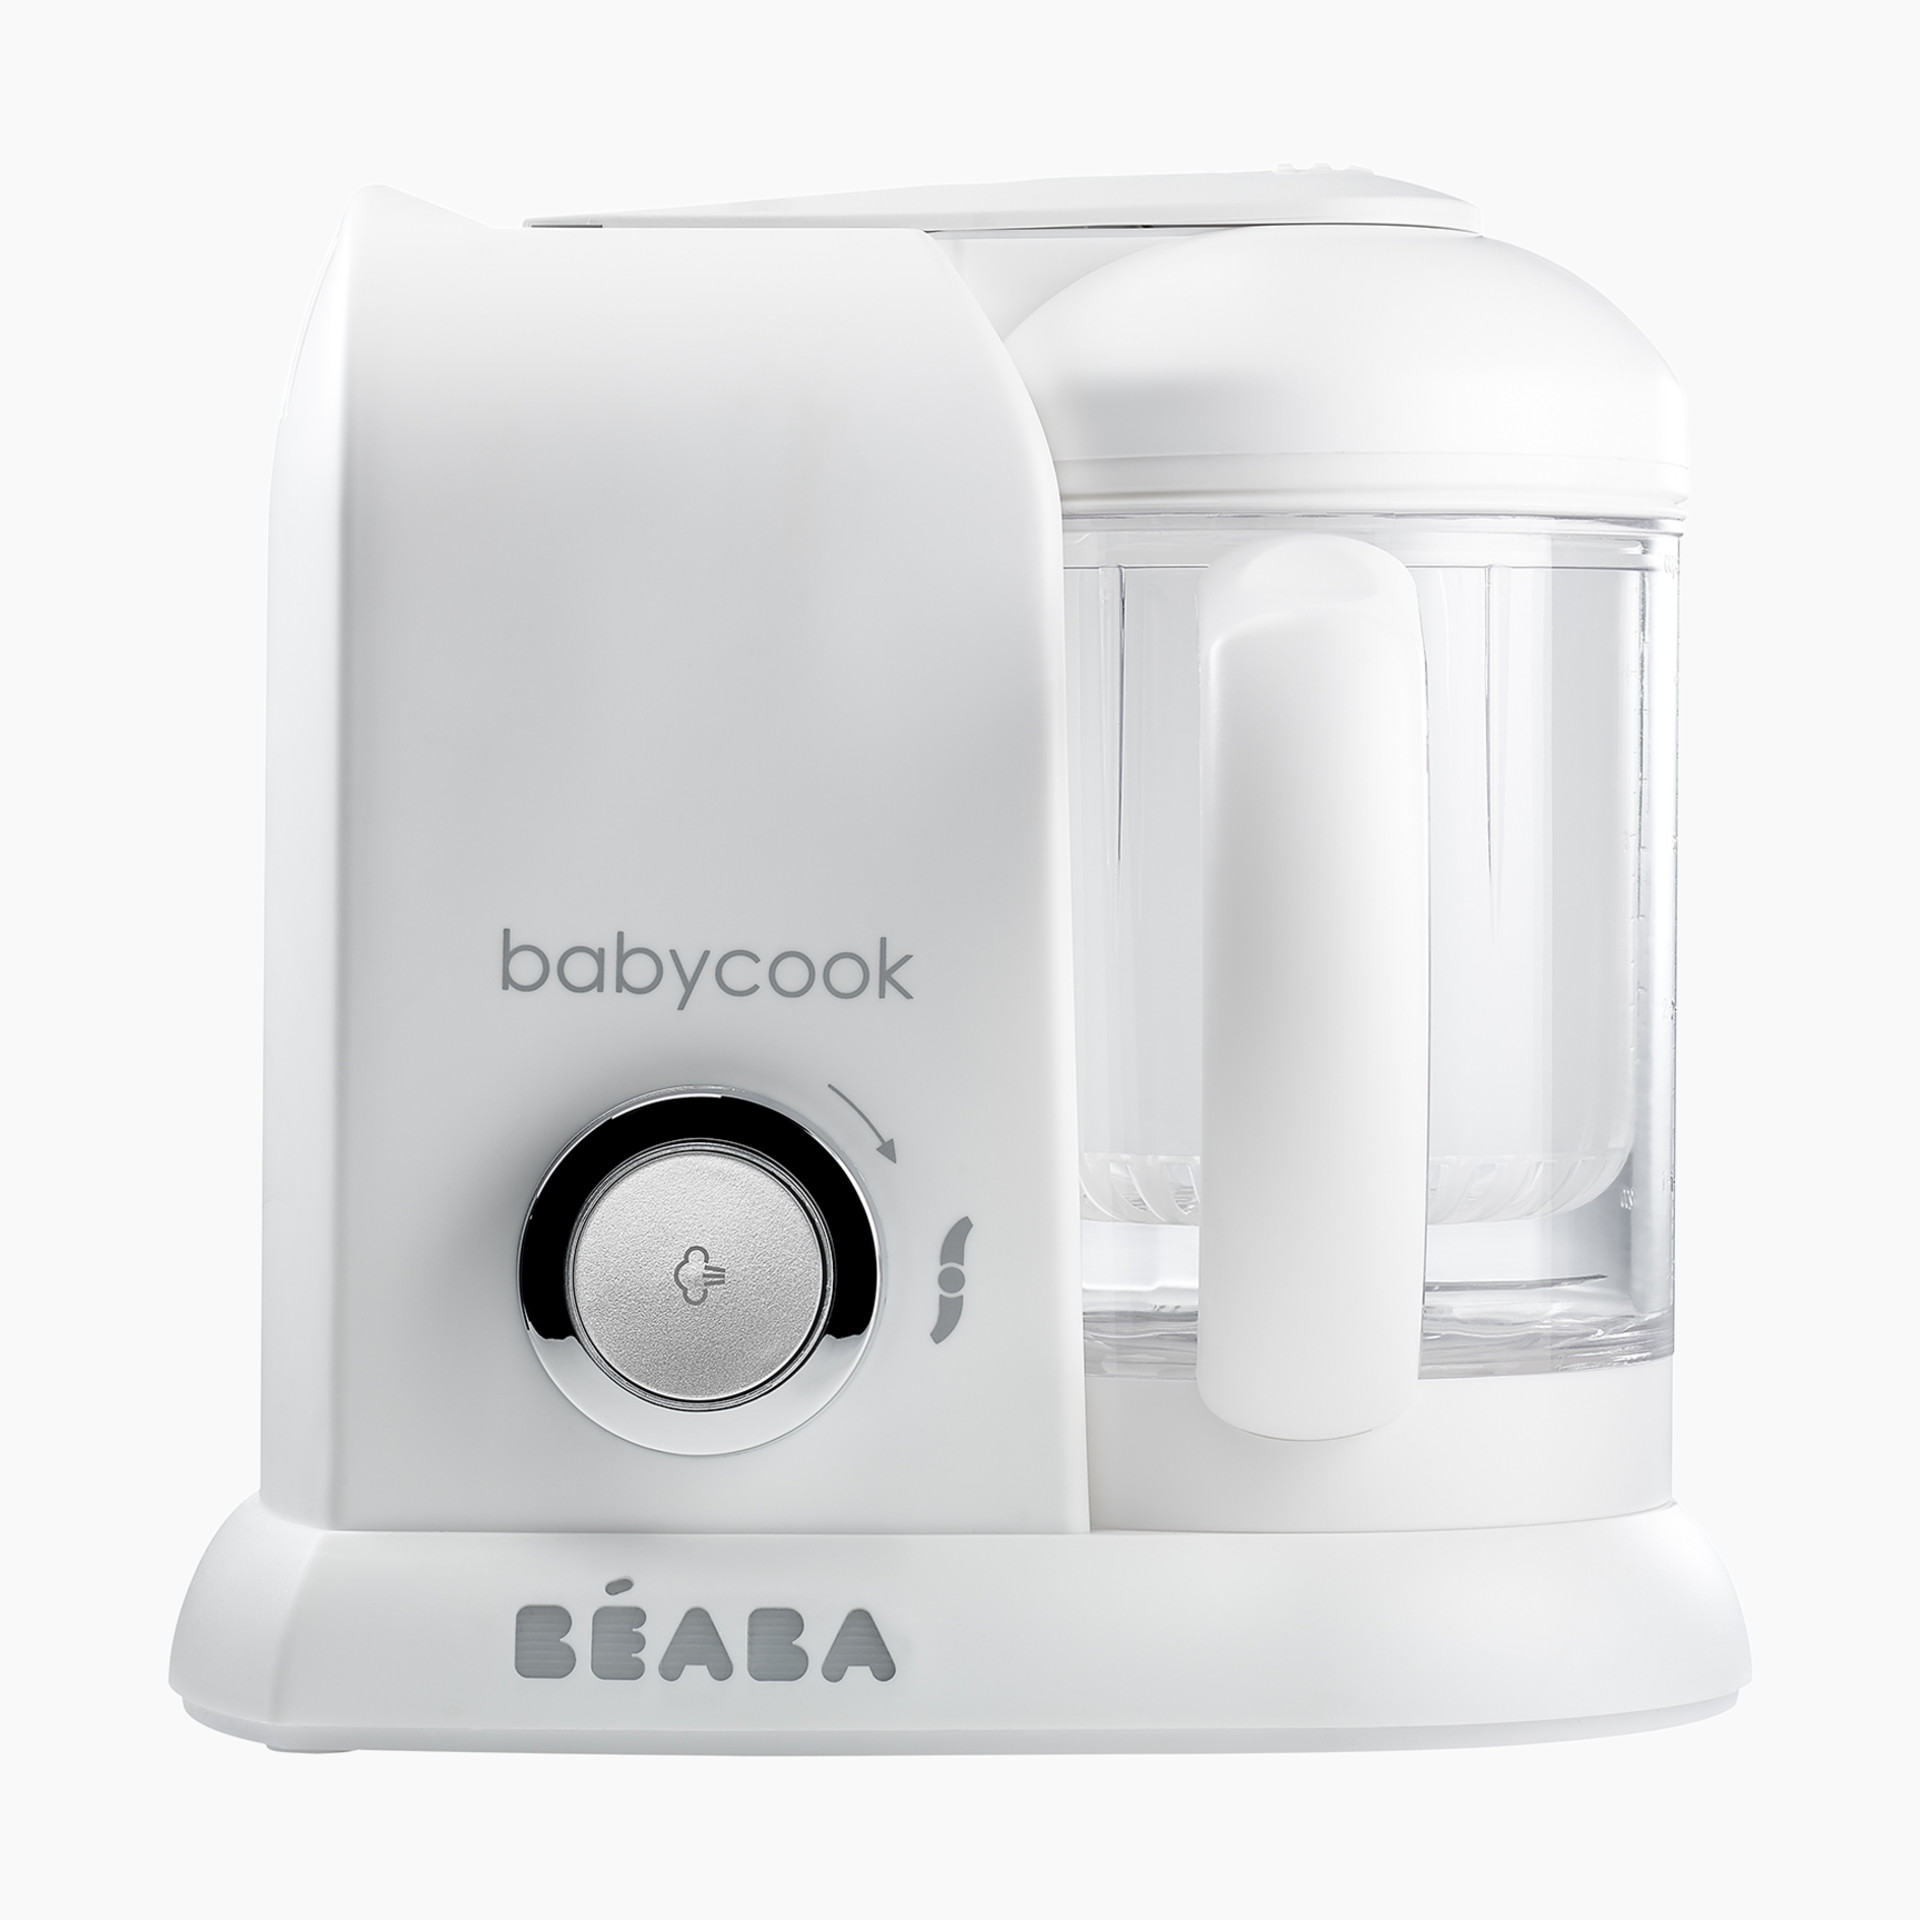 BEABA Babycook Solo 4 in 1 Baby Food Maker, Baby Food Processor, Steam Cook  + Blend, Large Capacity 4.5 Cups - 27 Servings in 20 Mins, Cook Healthy